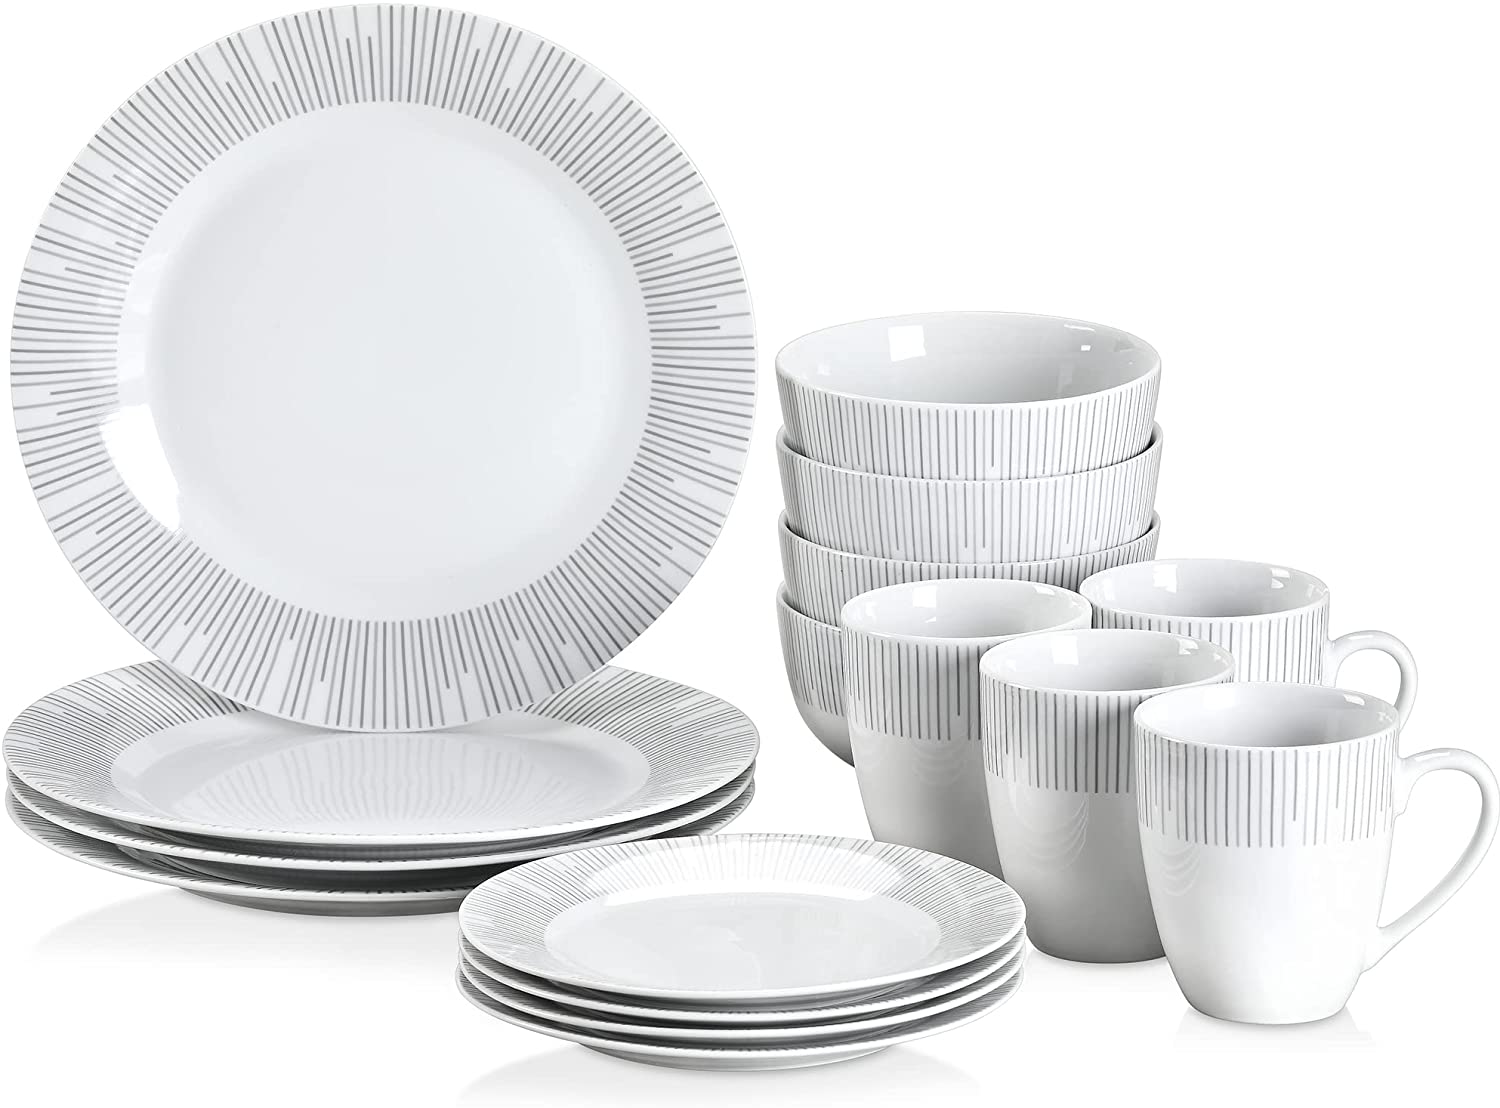 Veweet 32-piece Porcelain Dinner Set, 16-piece Crockery Set includes 10.75 inch (27 cm) Dinner Plate, 7.5 inch (19 cm) Dessert Plate, 5.5 inch (14 cm) Bowl and 380 ml Coffee Mug, Complete Service for 4/8 People